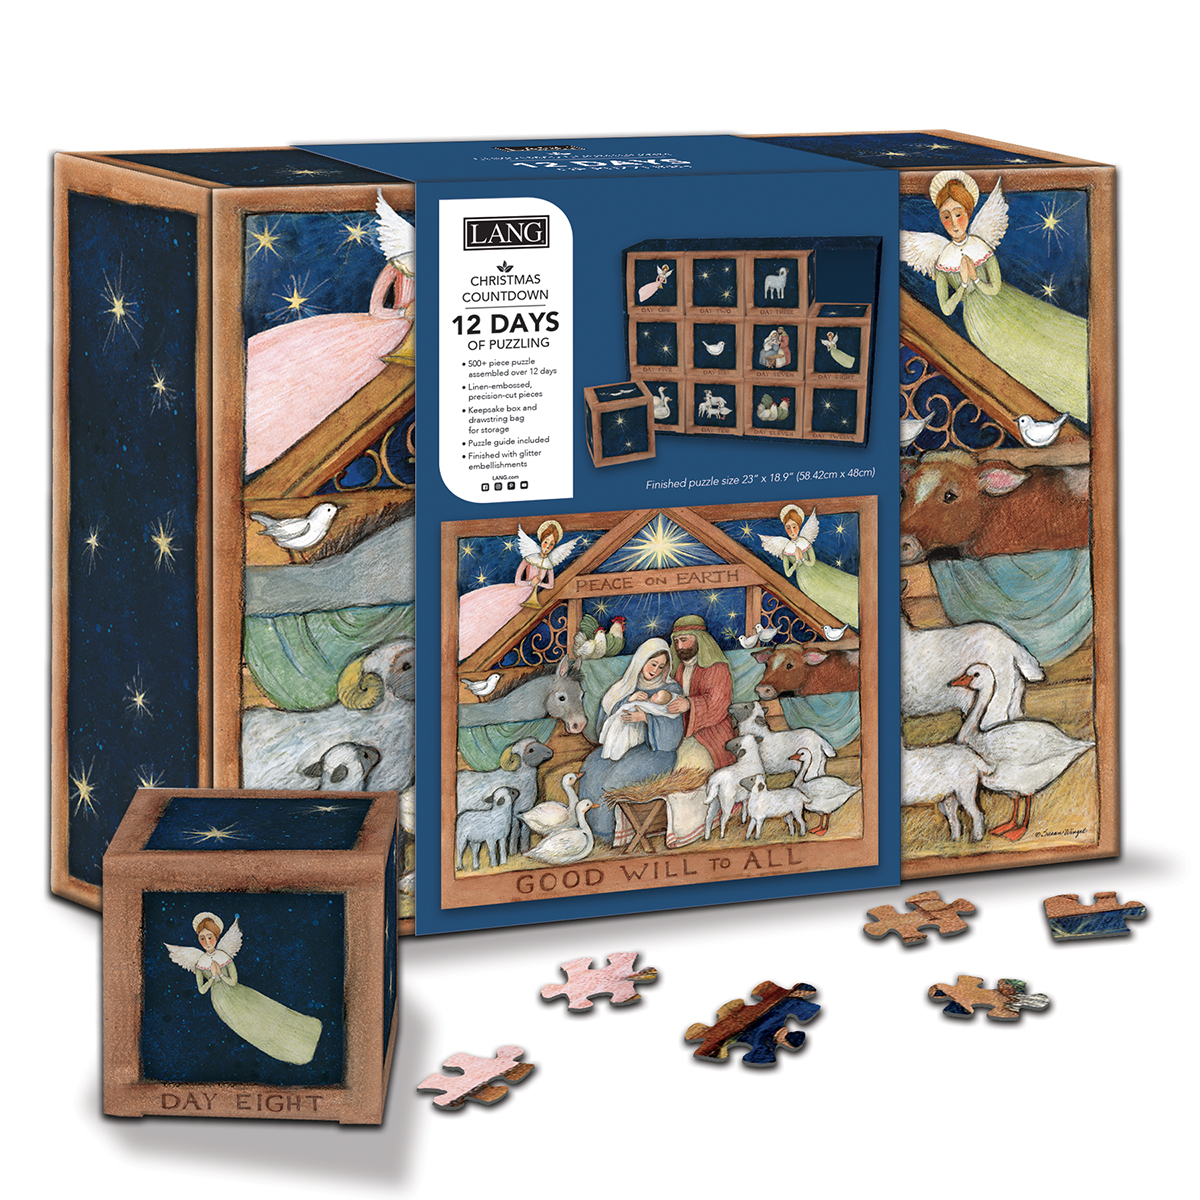 LANG 12 Days of Puzzling Christmas Countdown-Good Will To All by Susan Winget